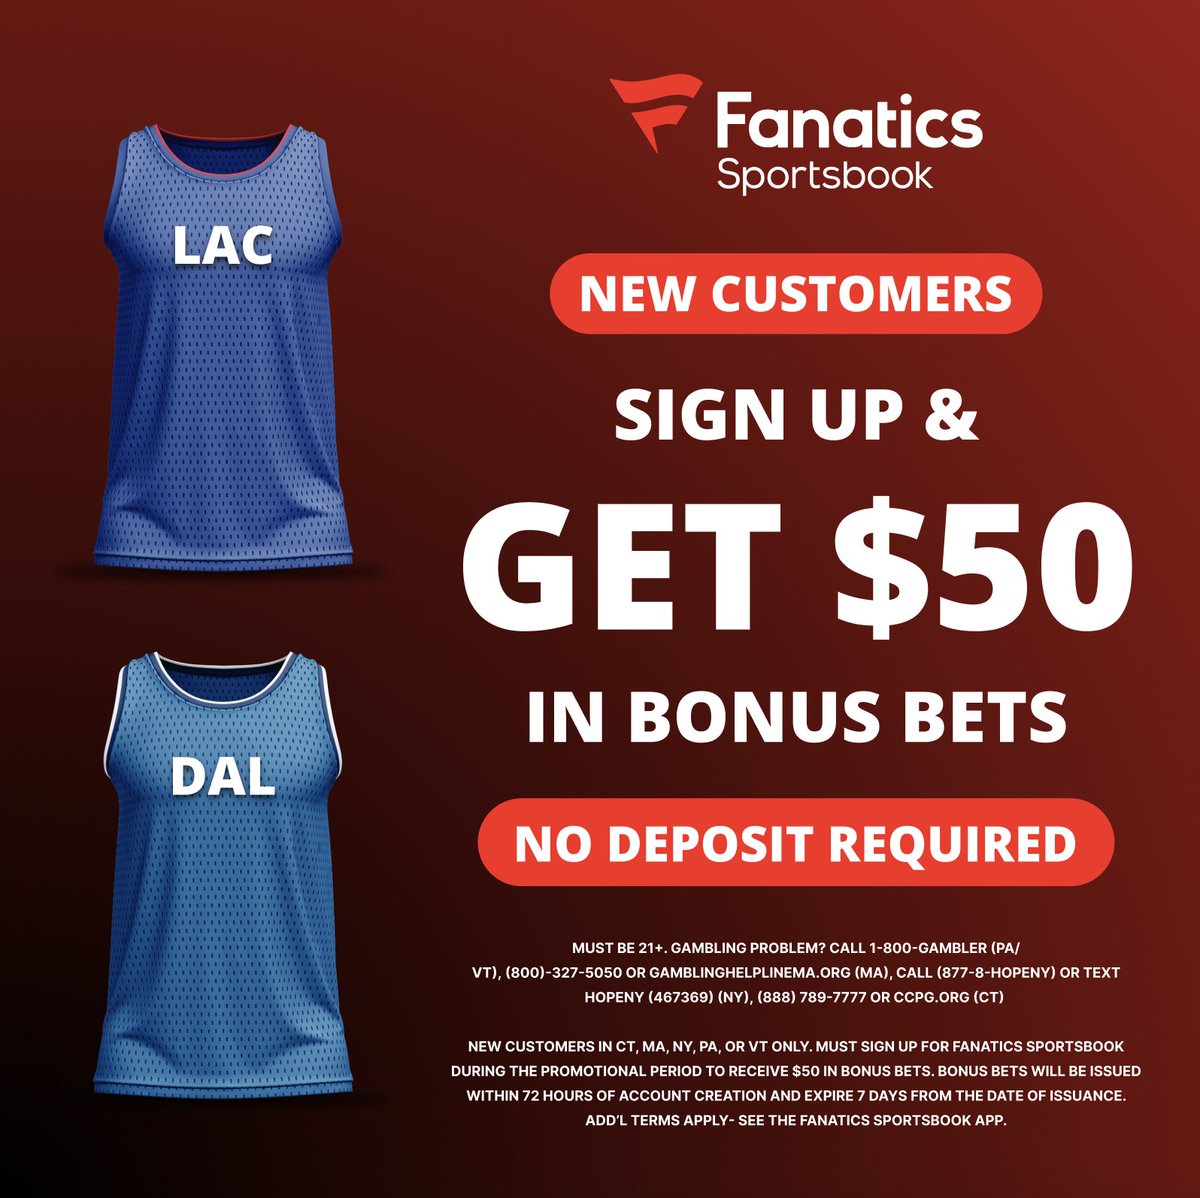 🚨 $50 NO DEPOSIT PROMO ON FANATICS 🚨 CLAIM HERE: flashpicks.bet/Fanatics50-Fiv… 1) Join using the link above 2) Make an account 3) GET $50 BONUS BETS INSANE PROMO. $50 with no deposit required 🤯 (CT, MA, NY, PA & VT)